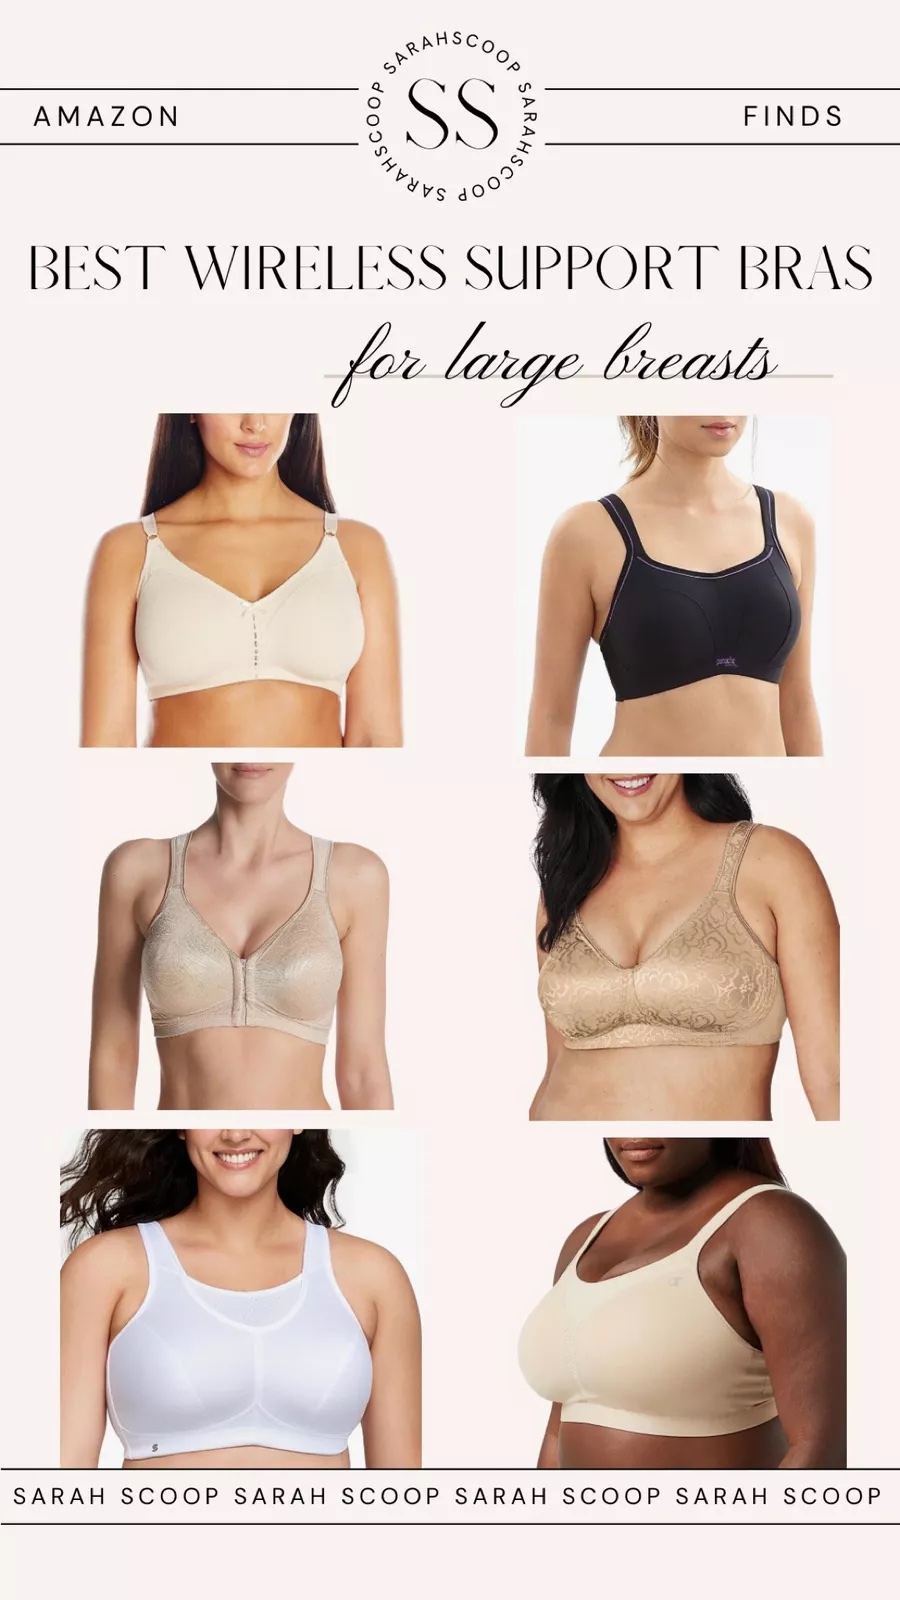 20+ Best Wireless Support Bras For Large Breasts